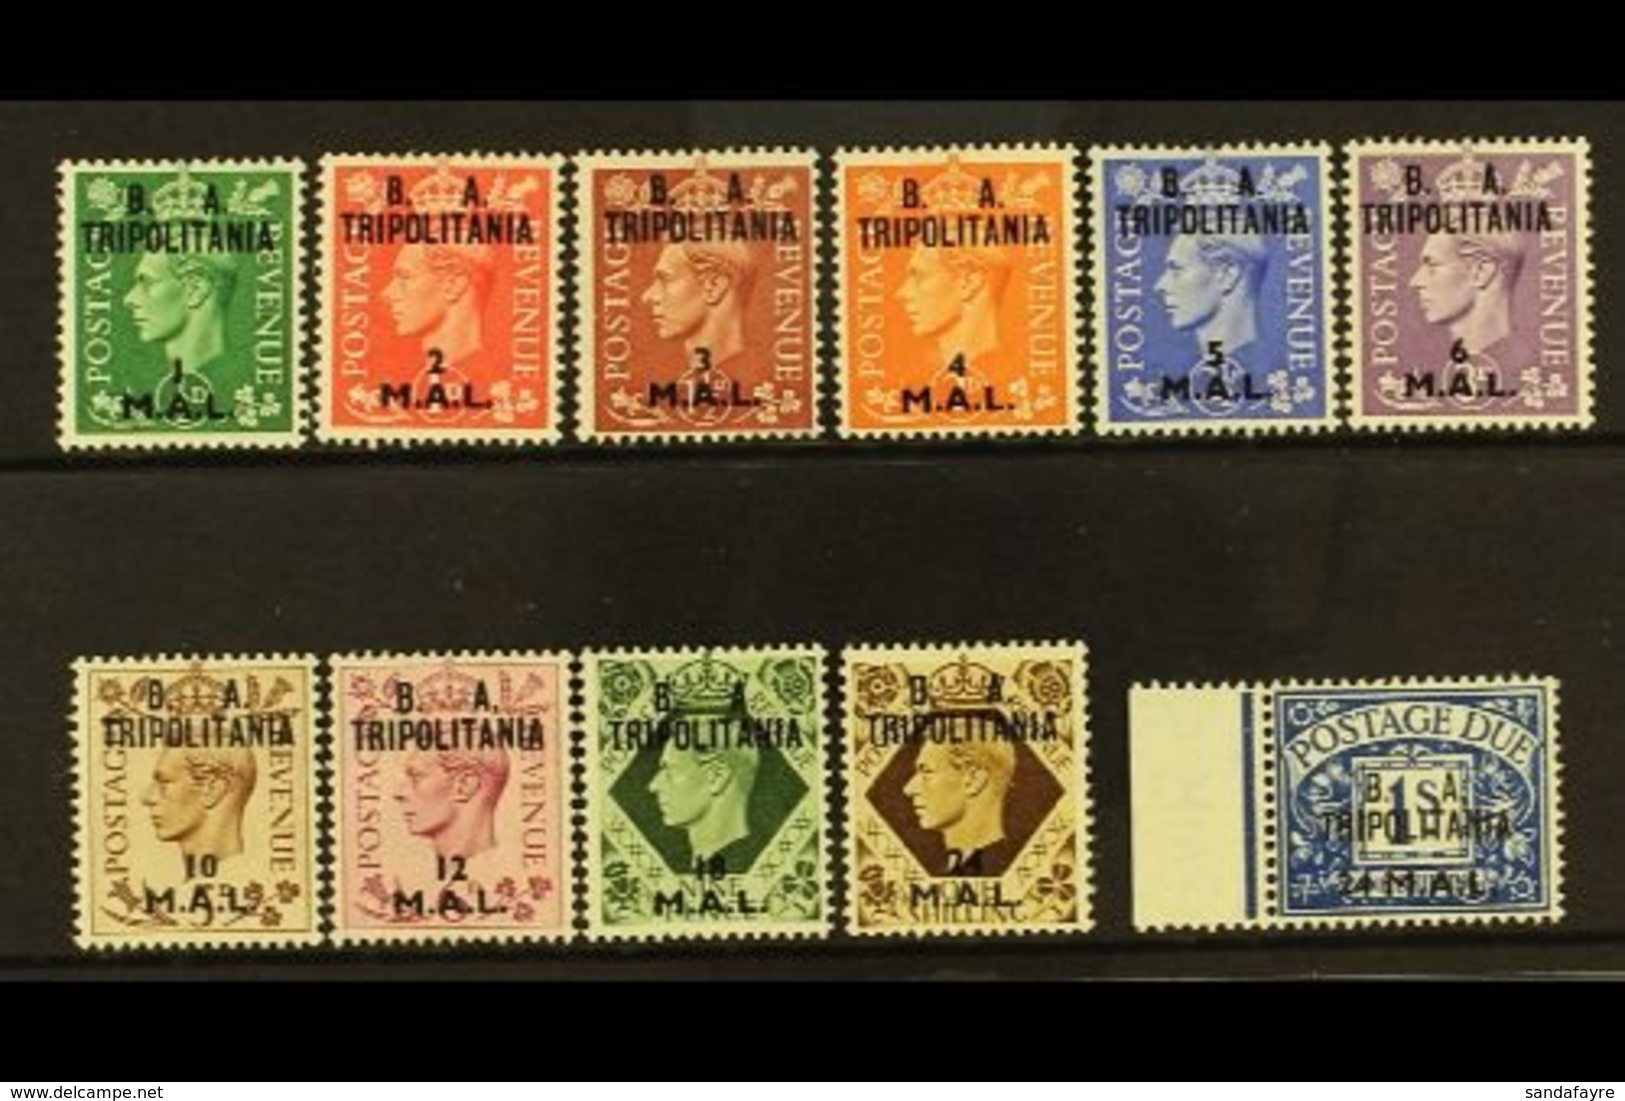 \Y TRIPOLITANIA\Y 1950 "B.A." Set To 24L On 1s (SG T14/23), Plus 24L On 1s Postage Due (SG TD10), Very Fine Mint. (11 St - Italiaans Oost-Afrika